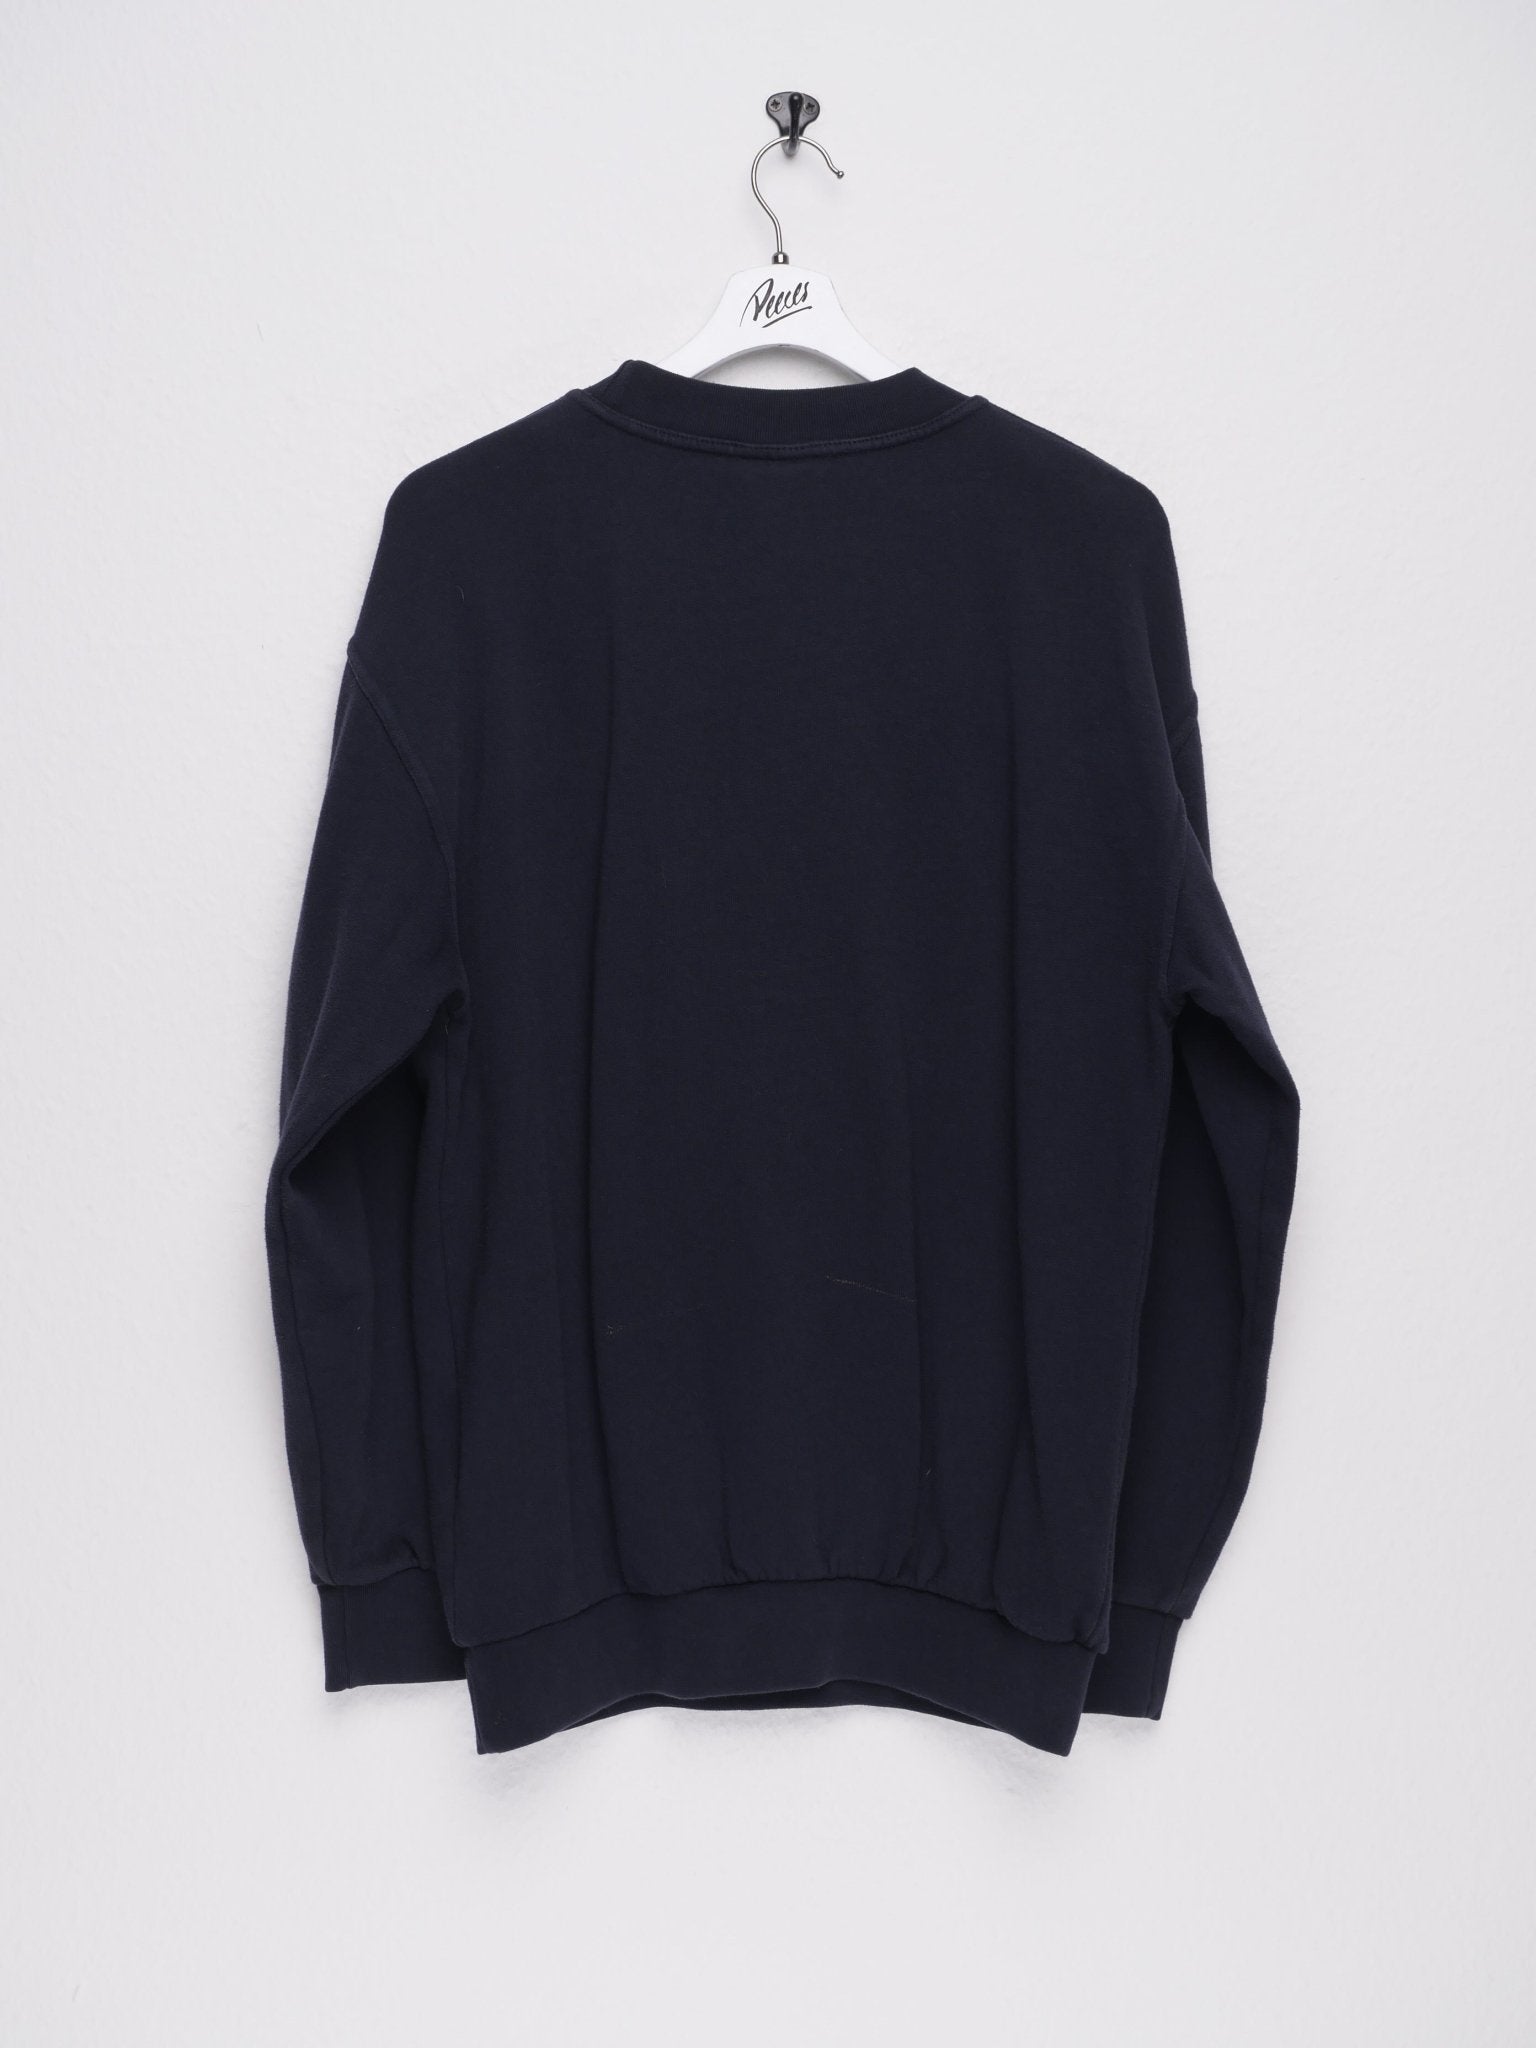 'Eickhoff' patched Spellout black Sweater - Peeces